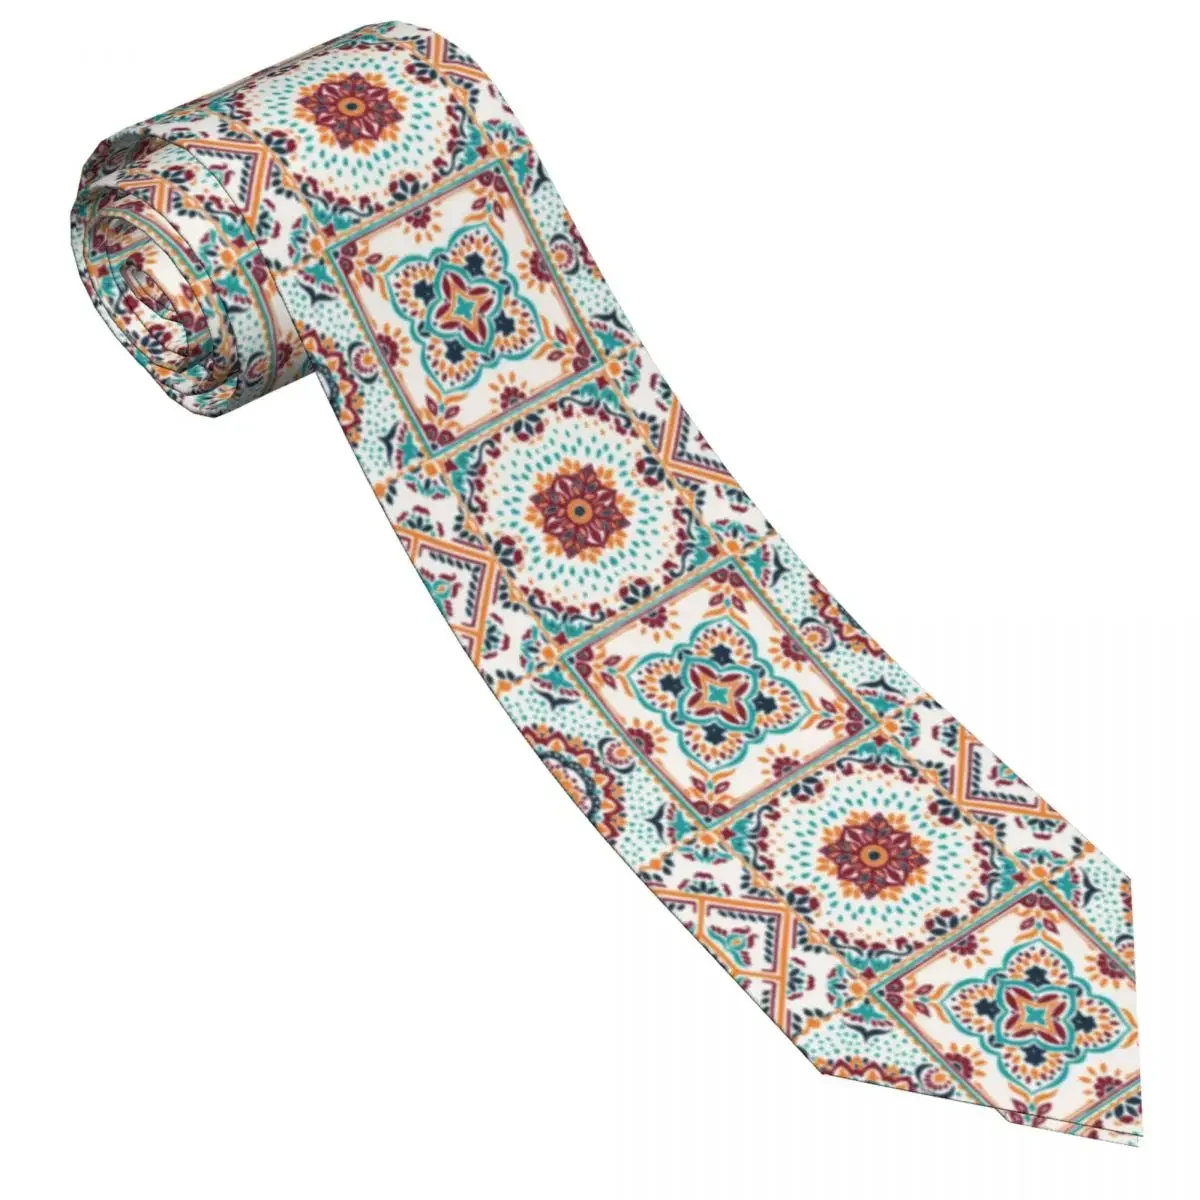 

Men's Tie Fashion Geometric Ethnic Neck Ties Bohemia Classic Collar Tie Printed Cosplay Party High Quality Necktie Accessories